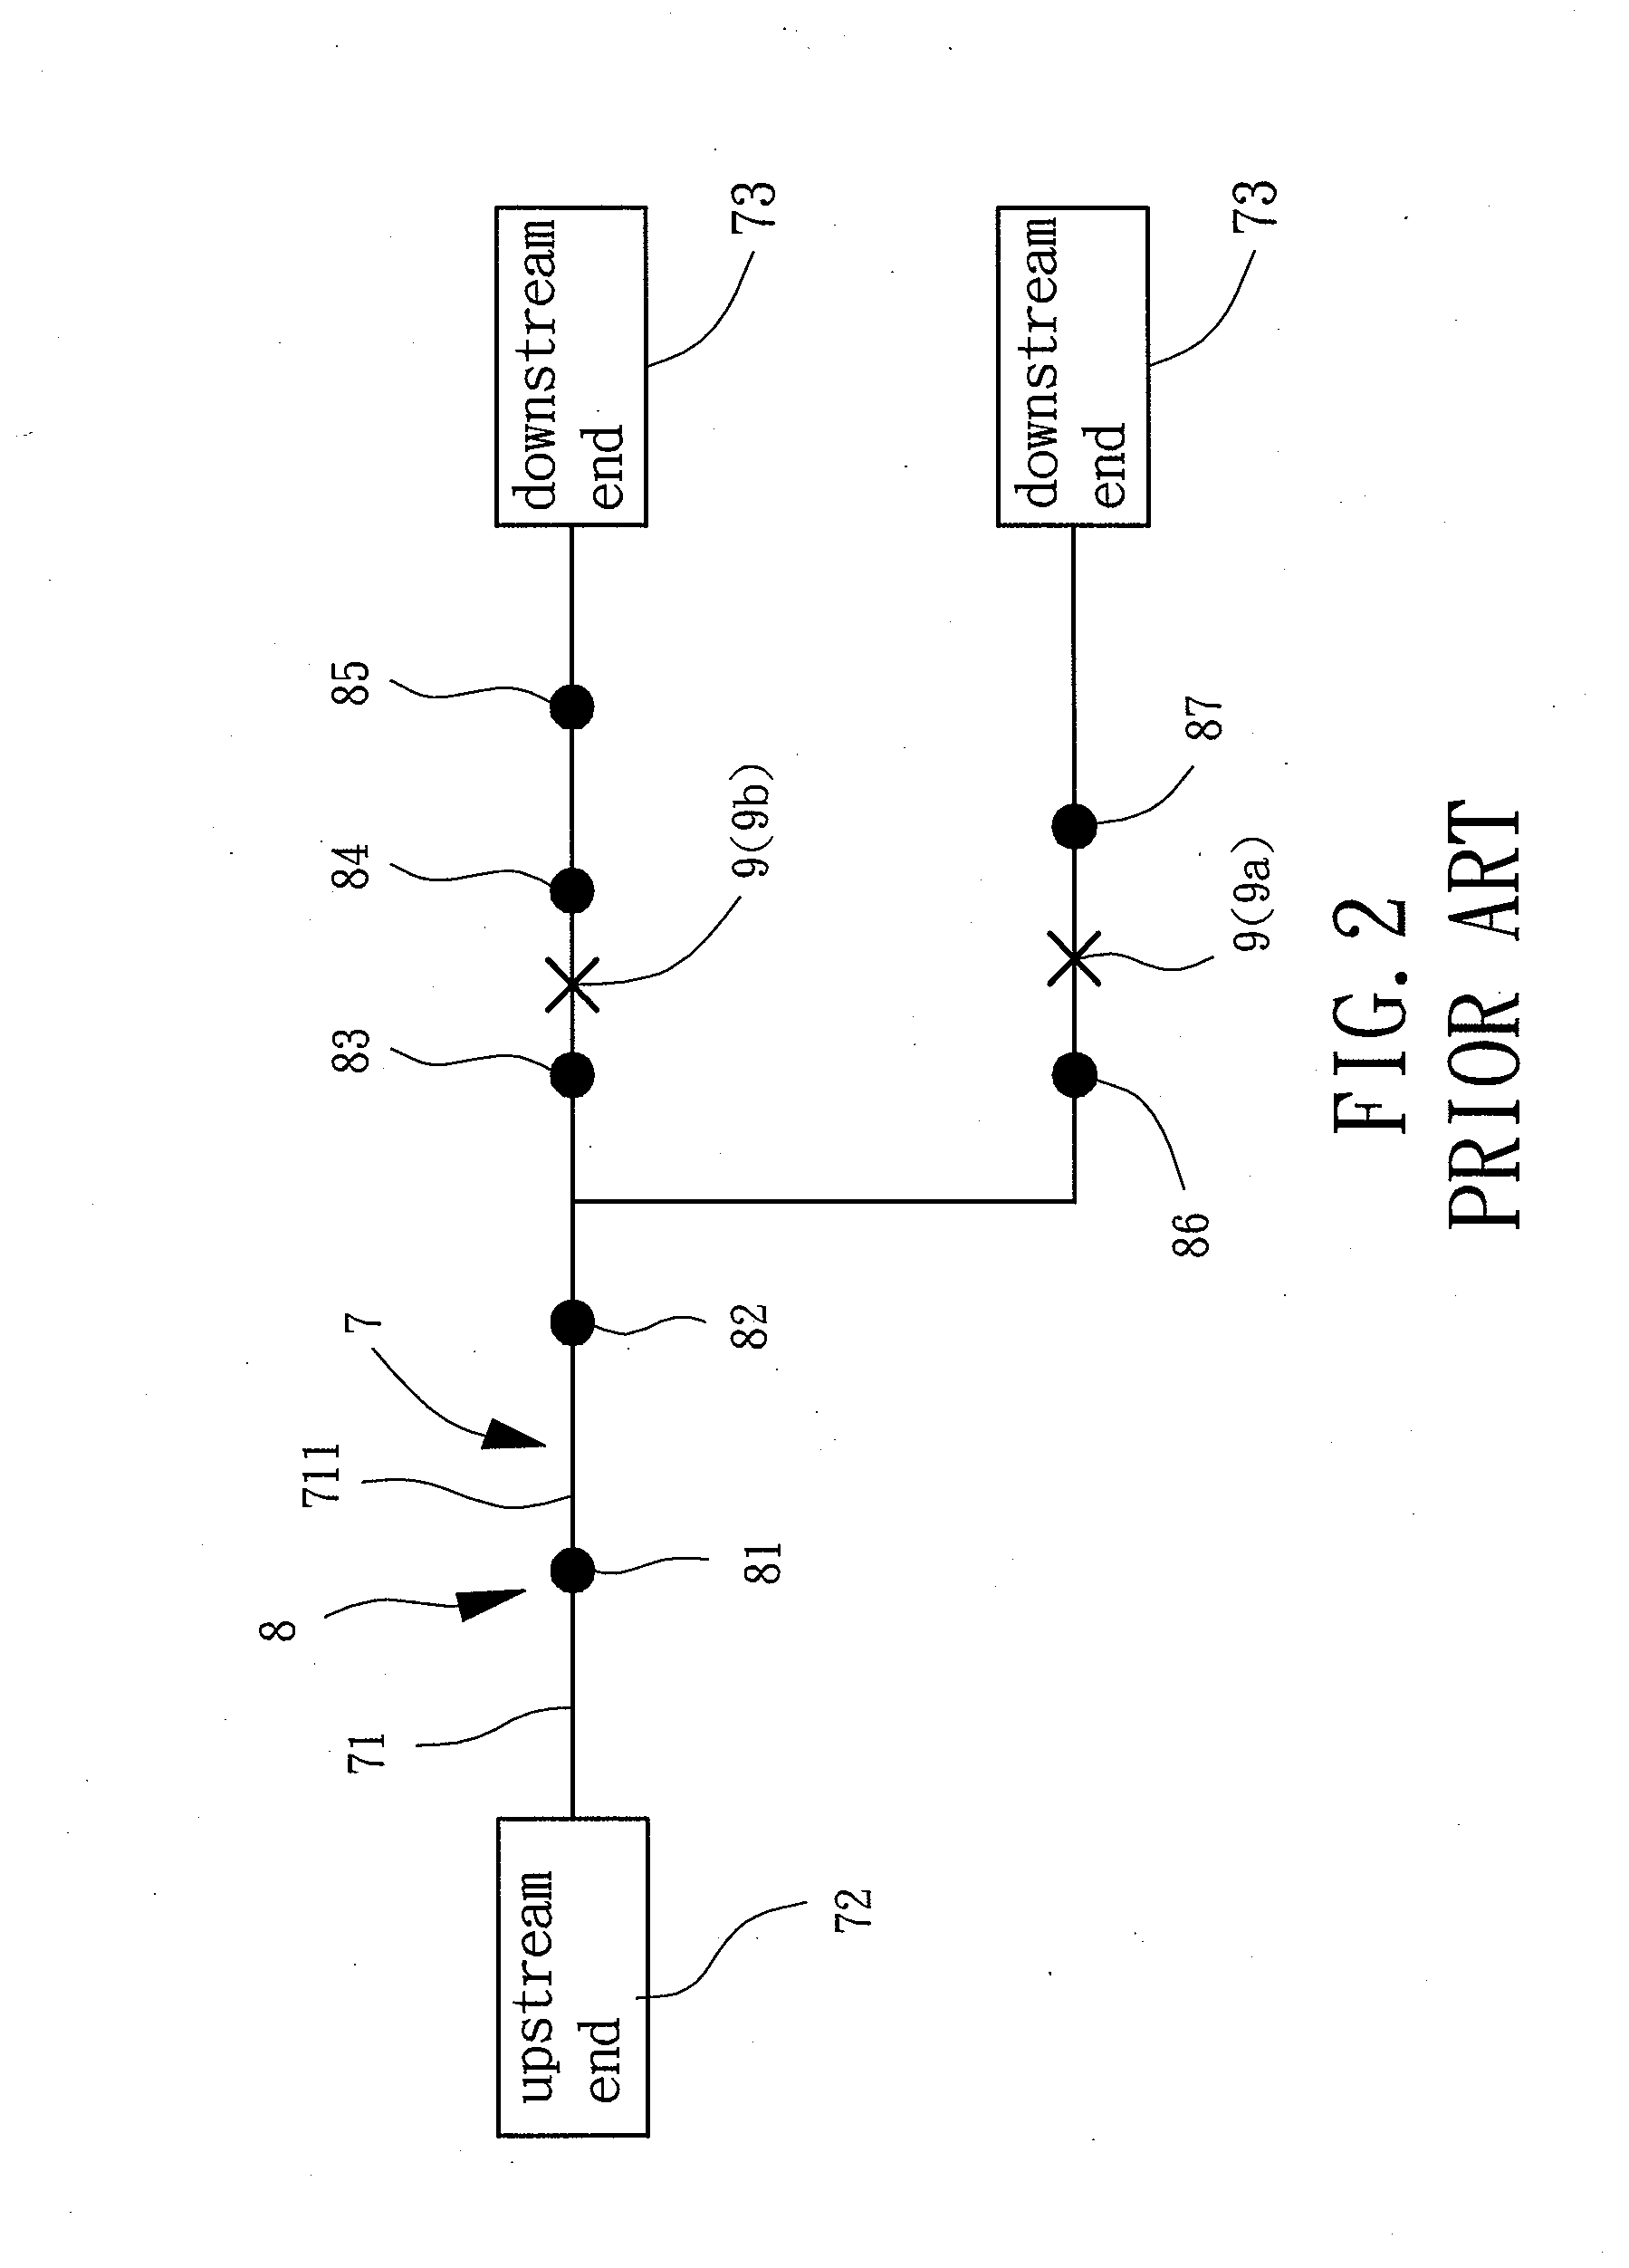 Method for locating faults in a power network having fault indicators